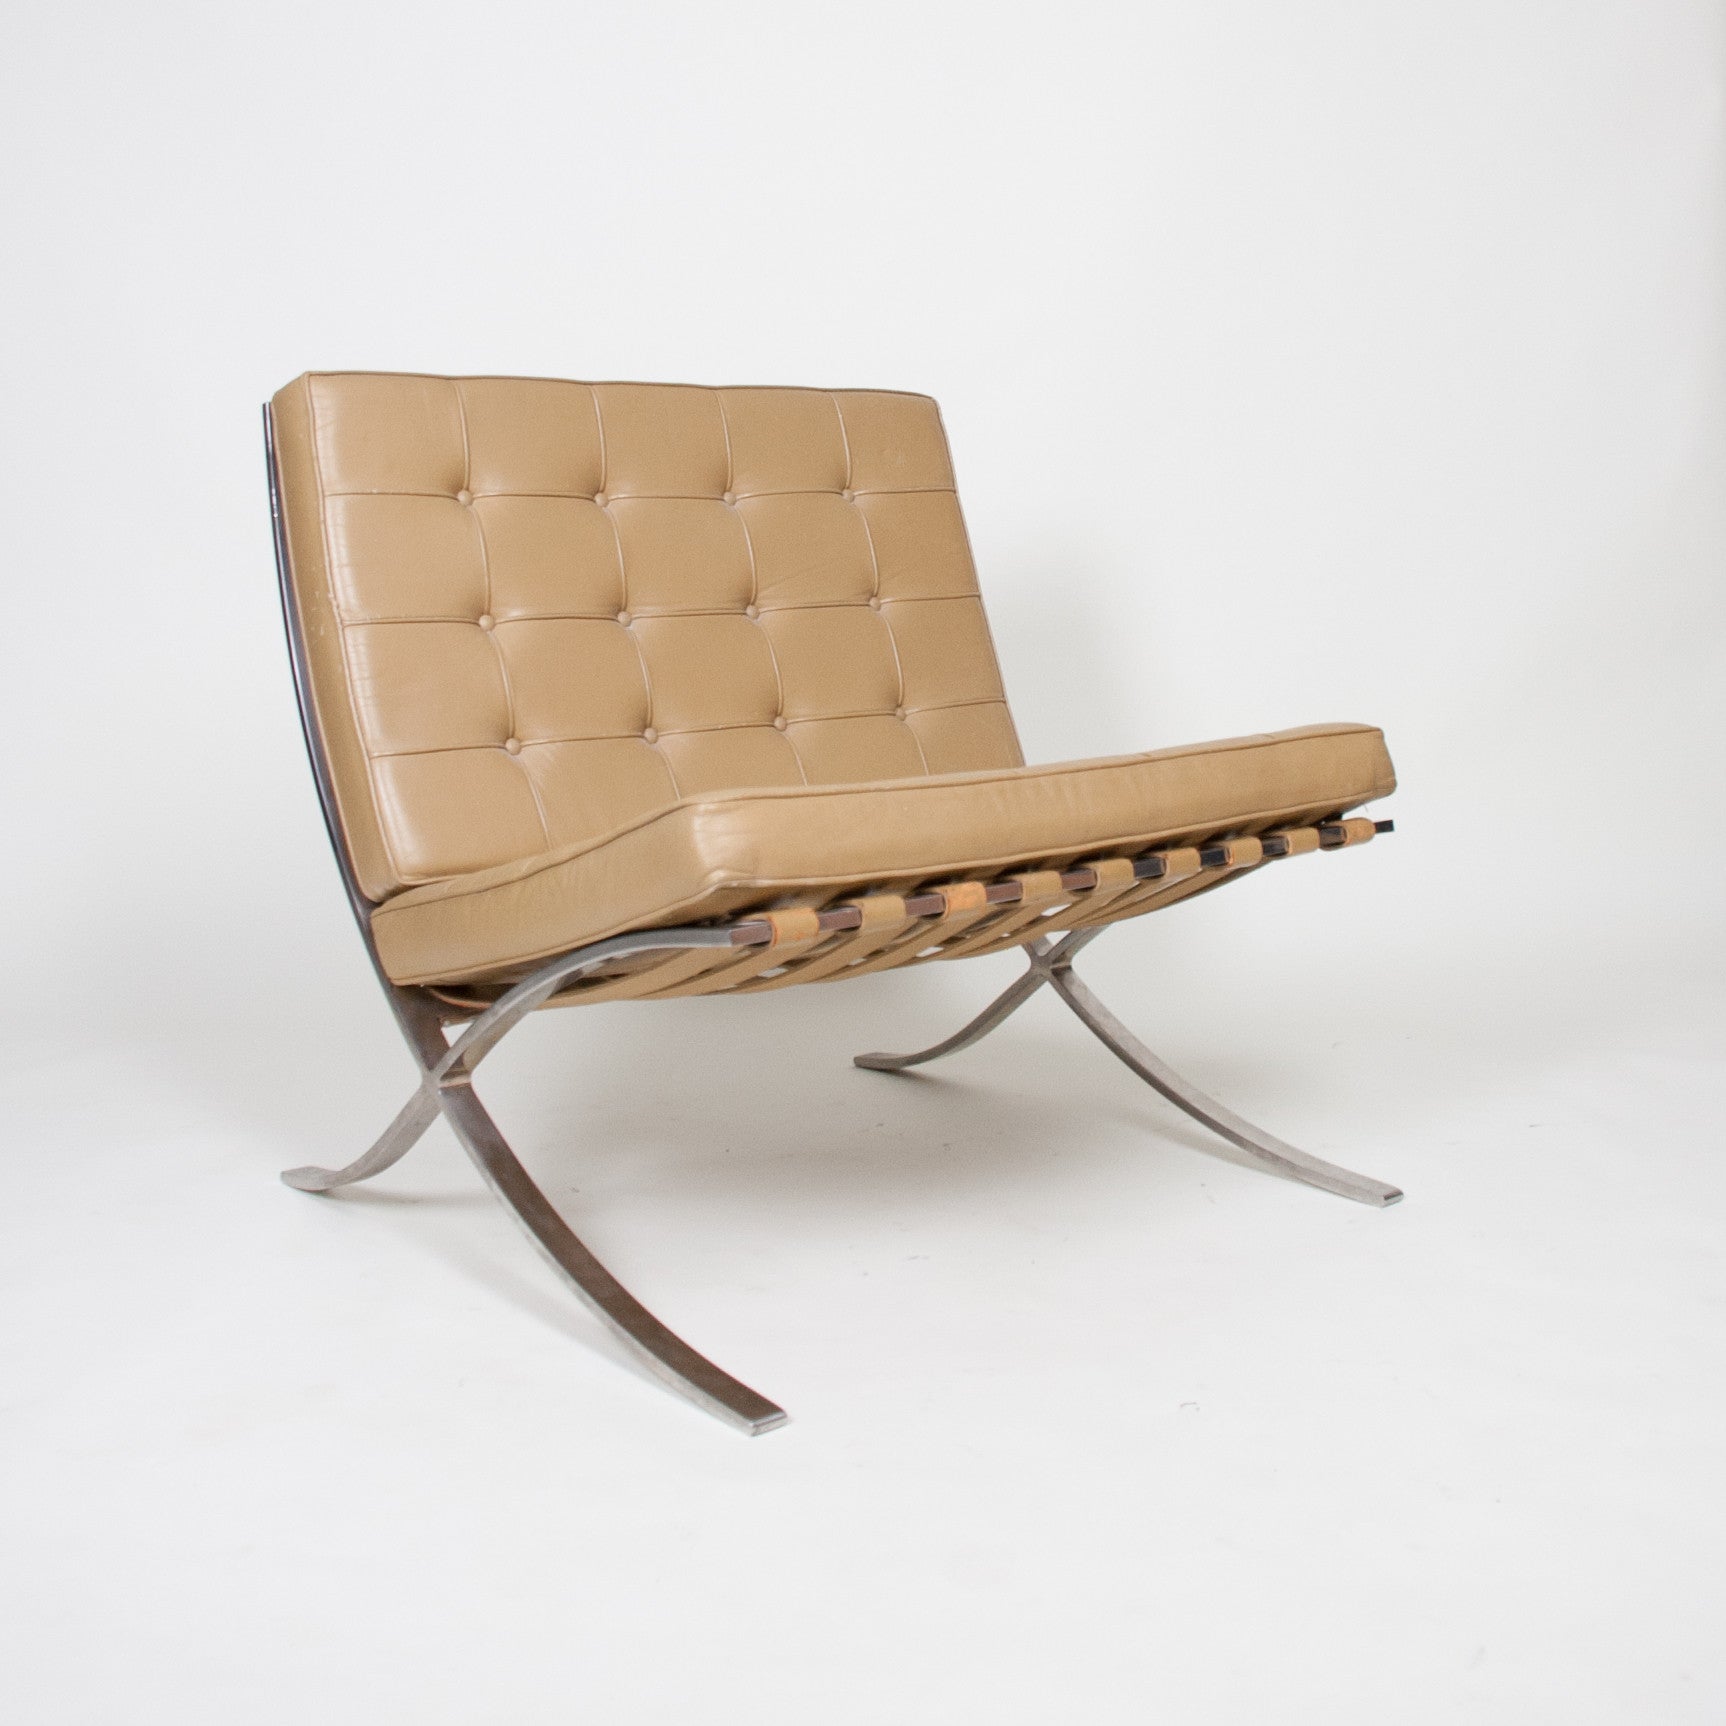 SOLD Knoll Mies Van Der Rohe Barcelona Chairs Stainless 2 Available